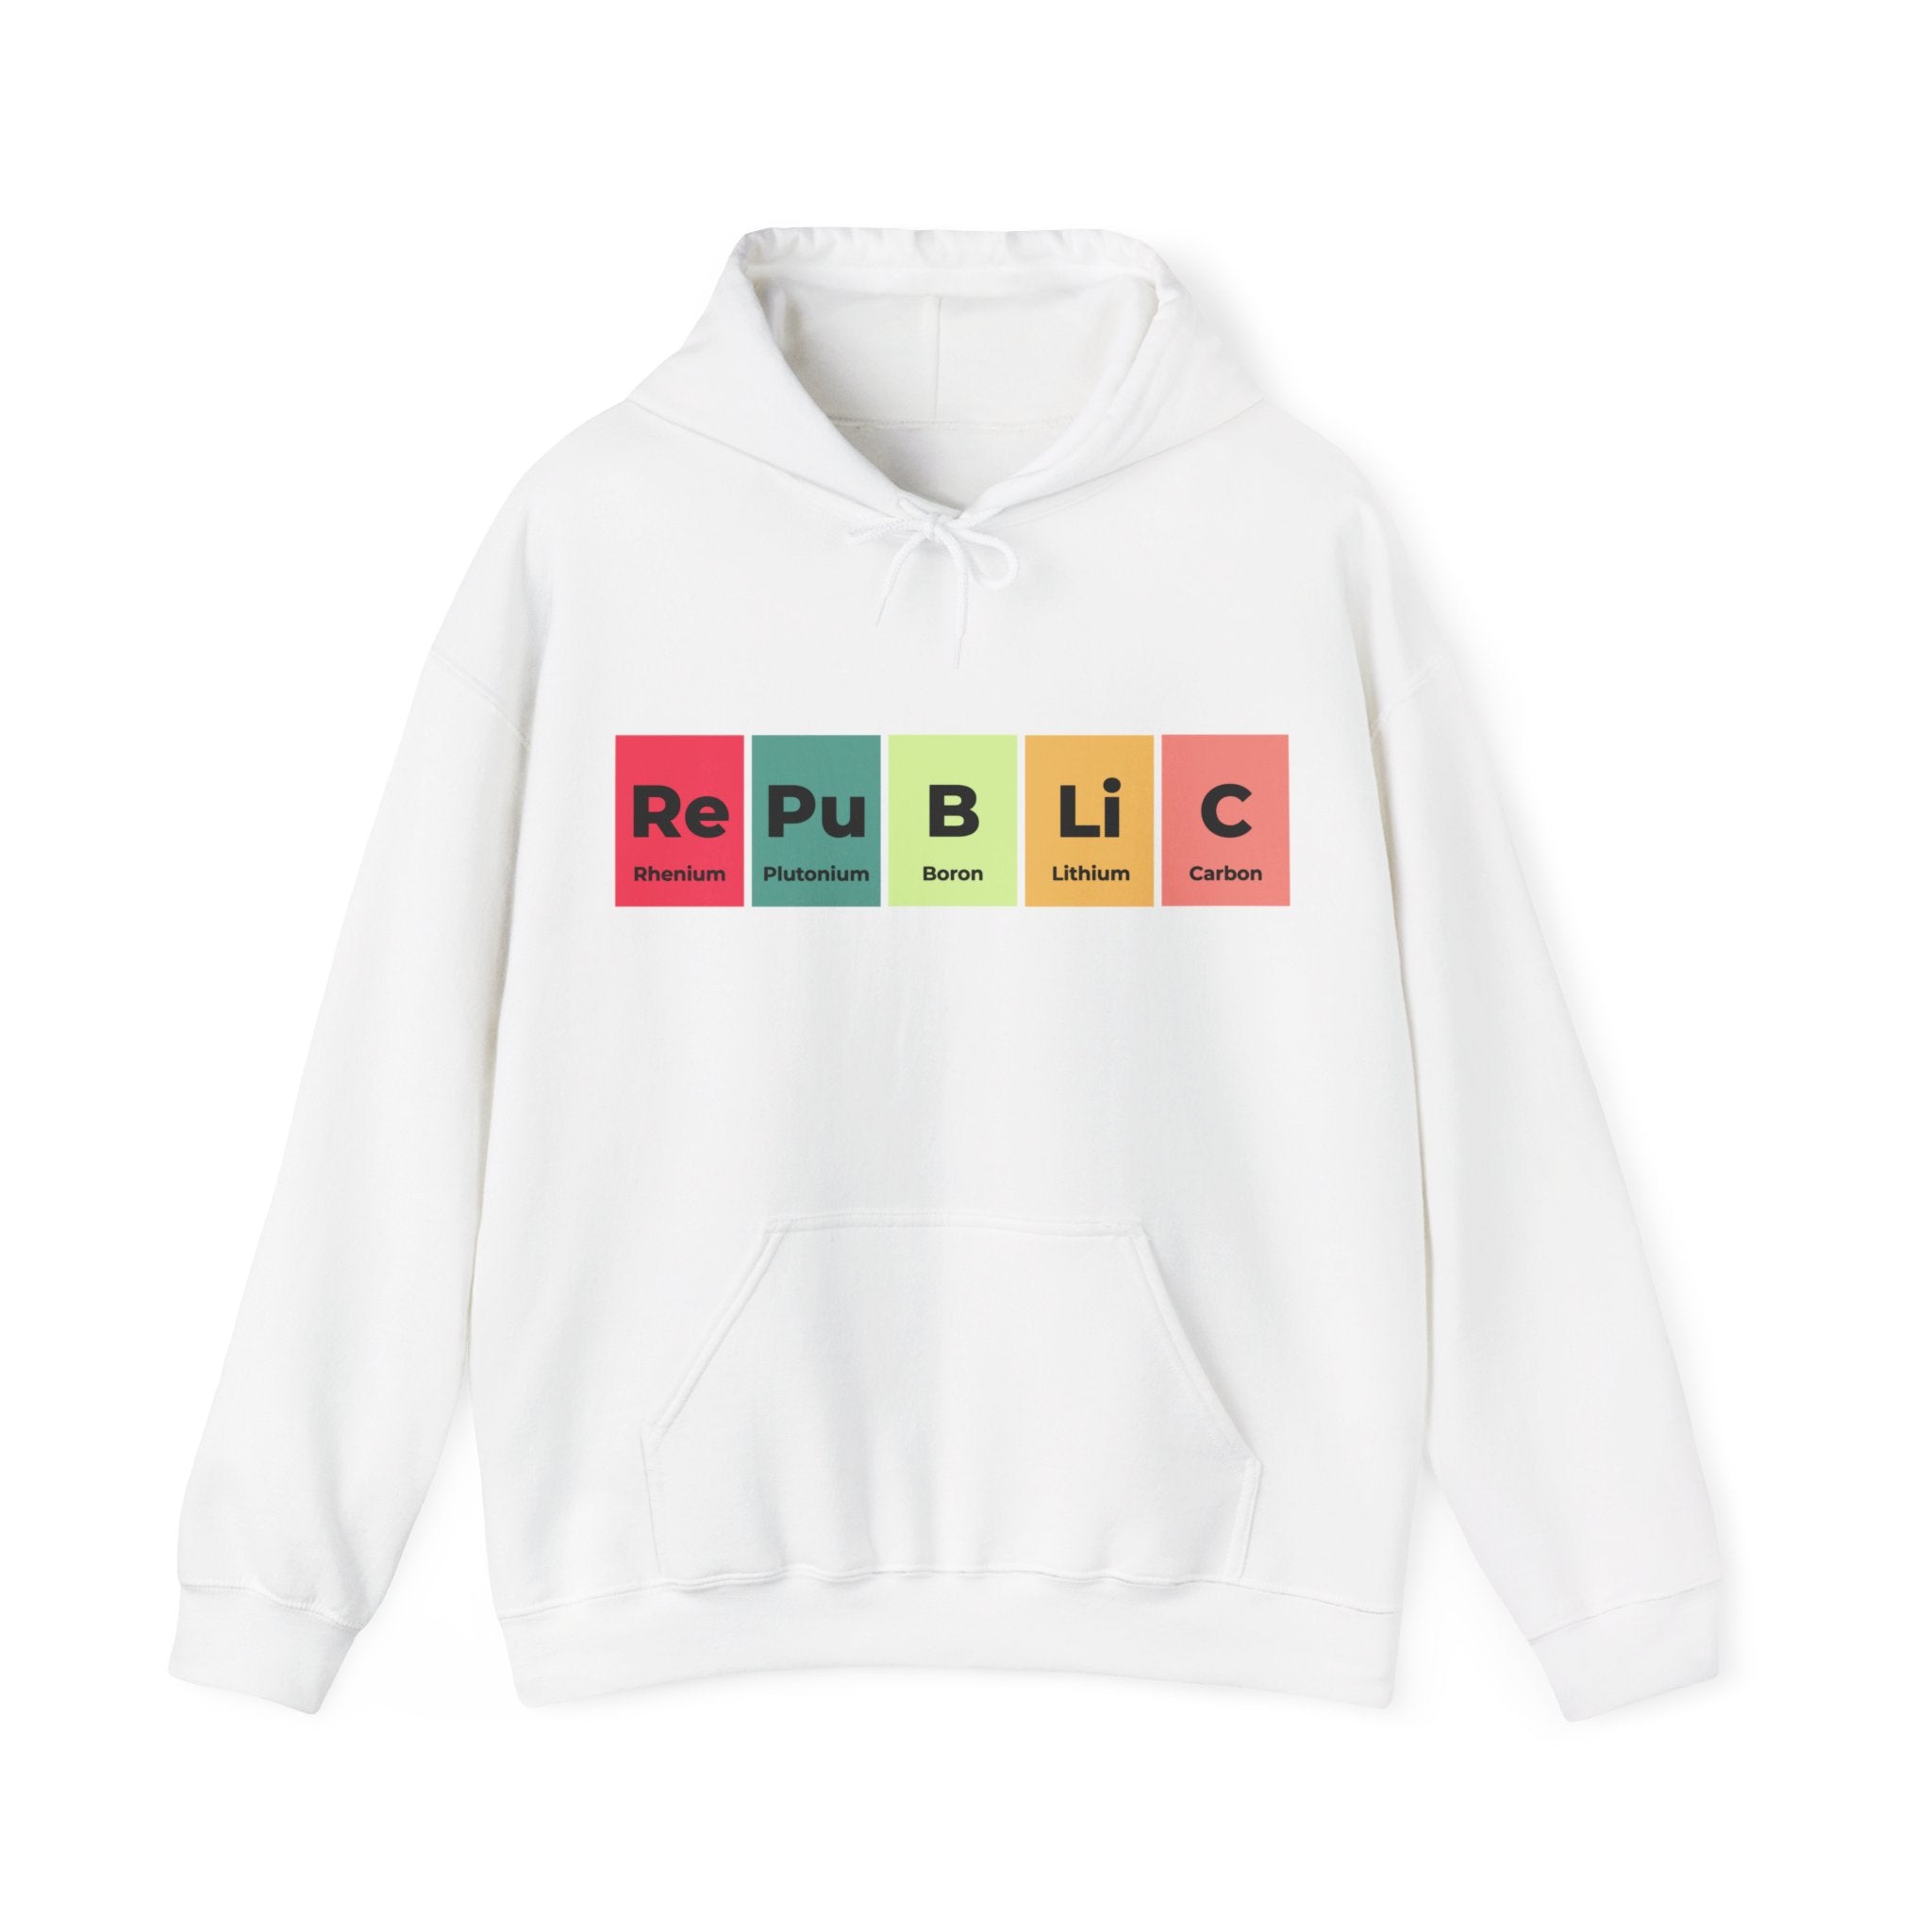 Republic - Hooded Sweatshirt with "Republic" stylishly spelled out using blocks representing chemical elements: Rhenium (Re), Plutonium (Pu), Boron (B), Lithium (Li), and Carbon (C). Show off your patriotic pride with these unique Republic designs.